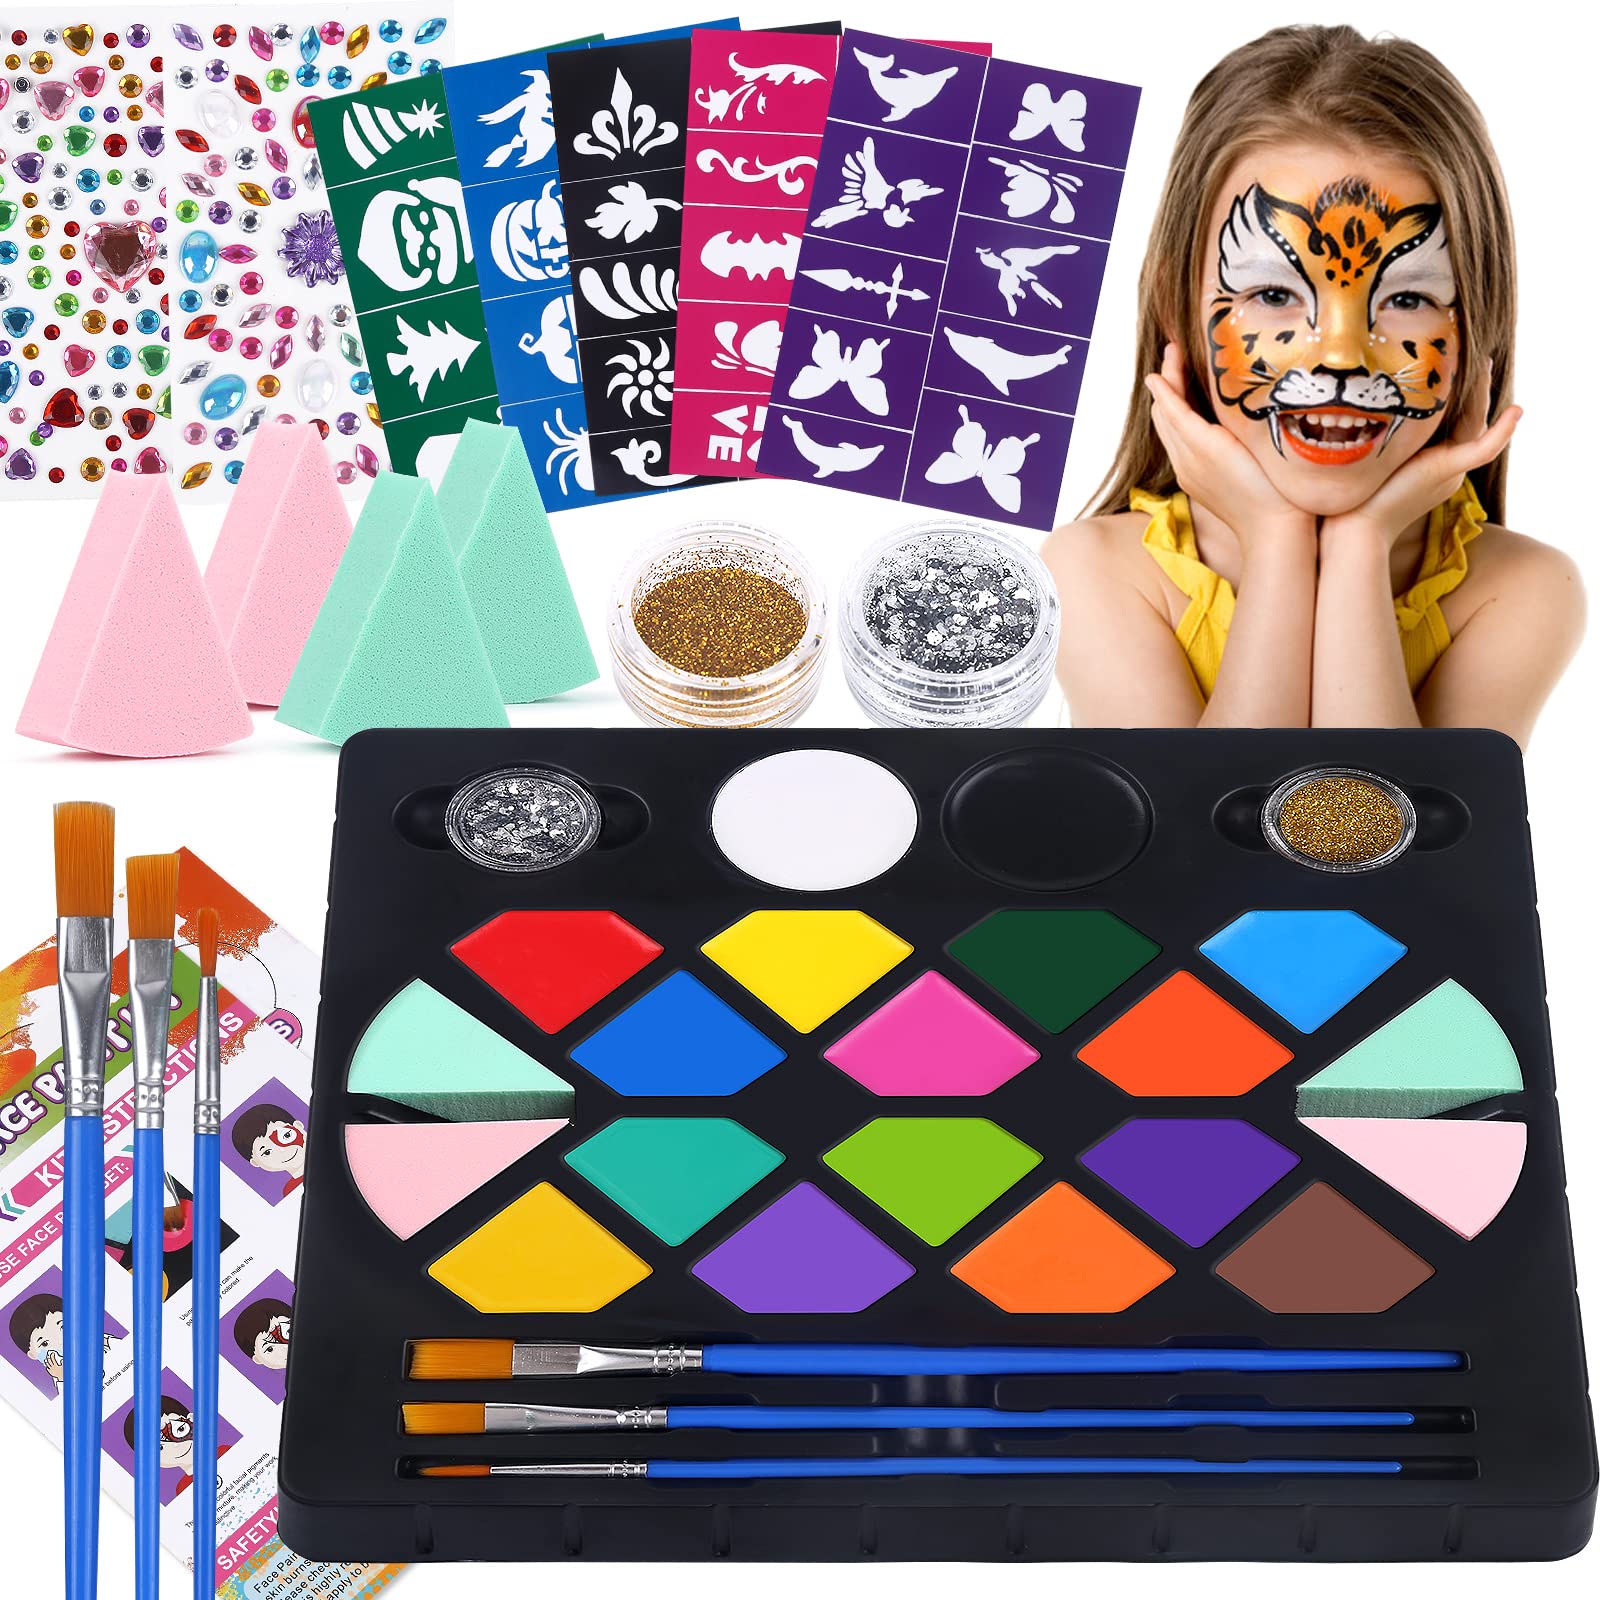 BOBISUKA Face Painting Kit for Kids - 16 Colors Water Based Body Face Paint  Includes Brushes,Sponges